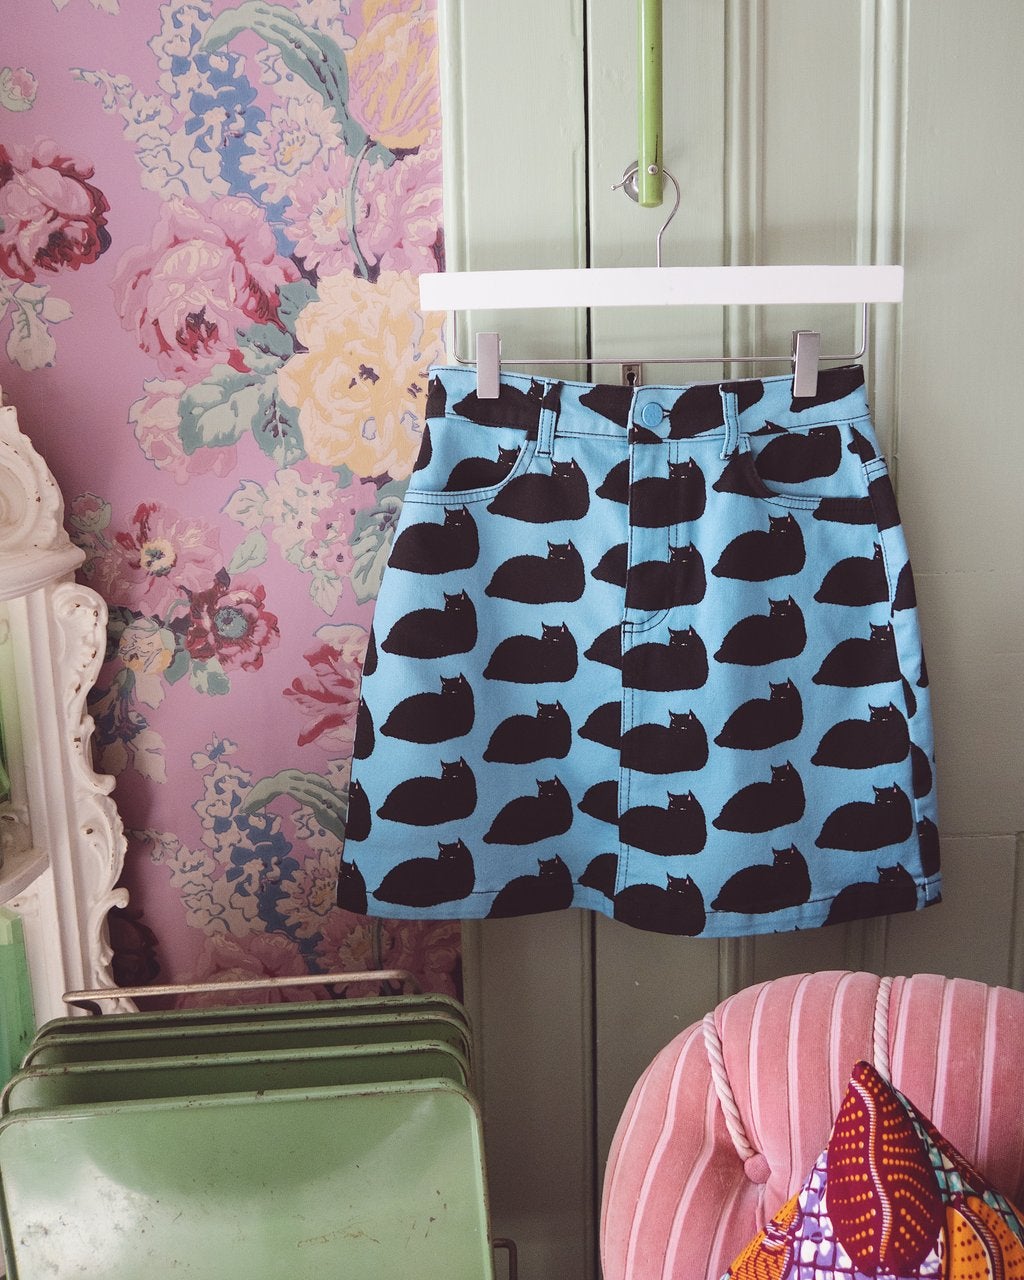 blue skirt with black cat pattern